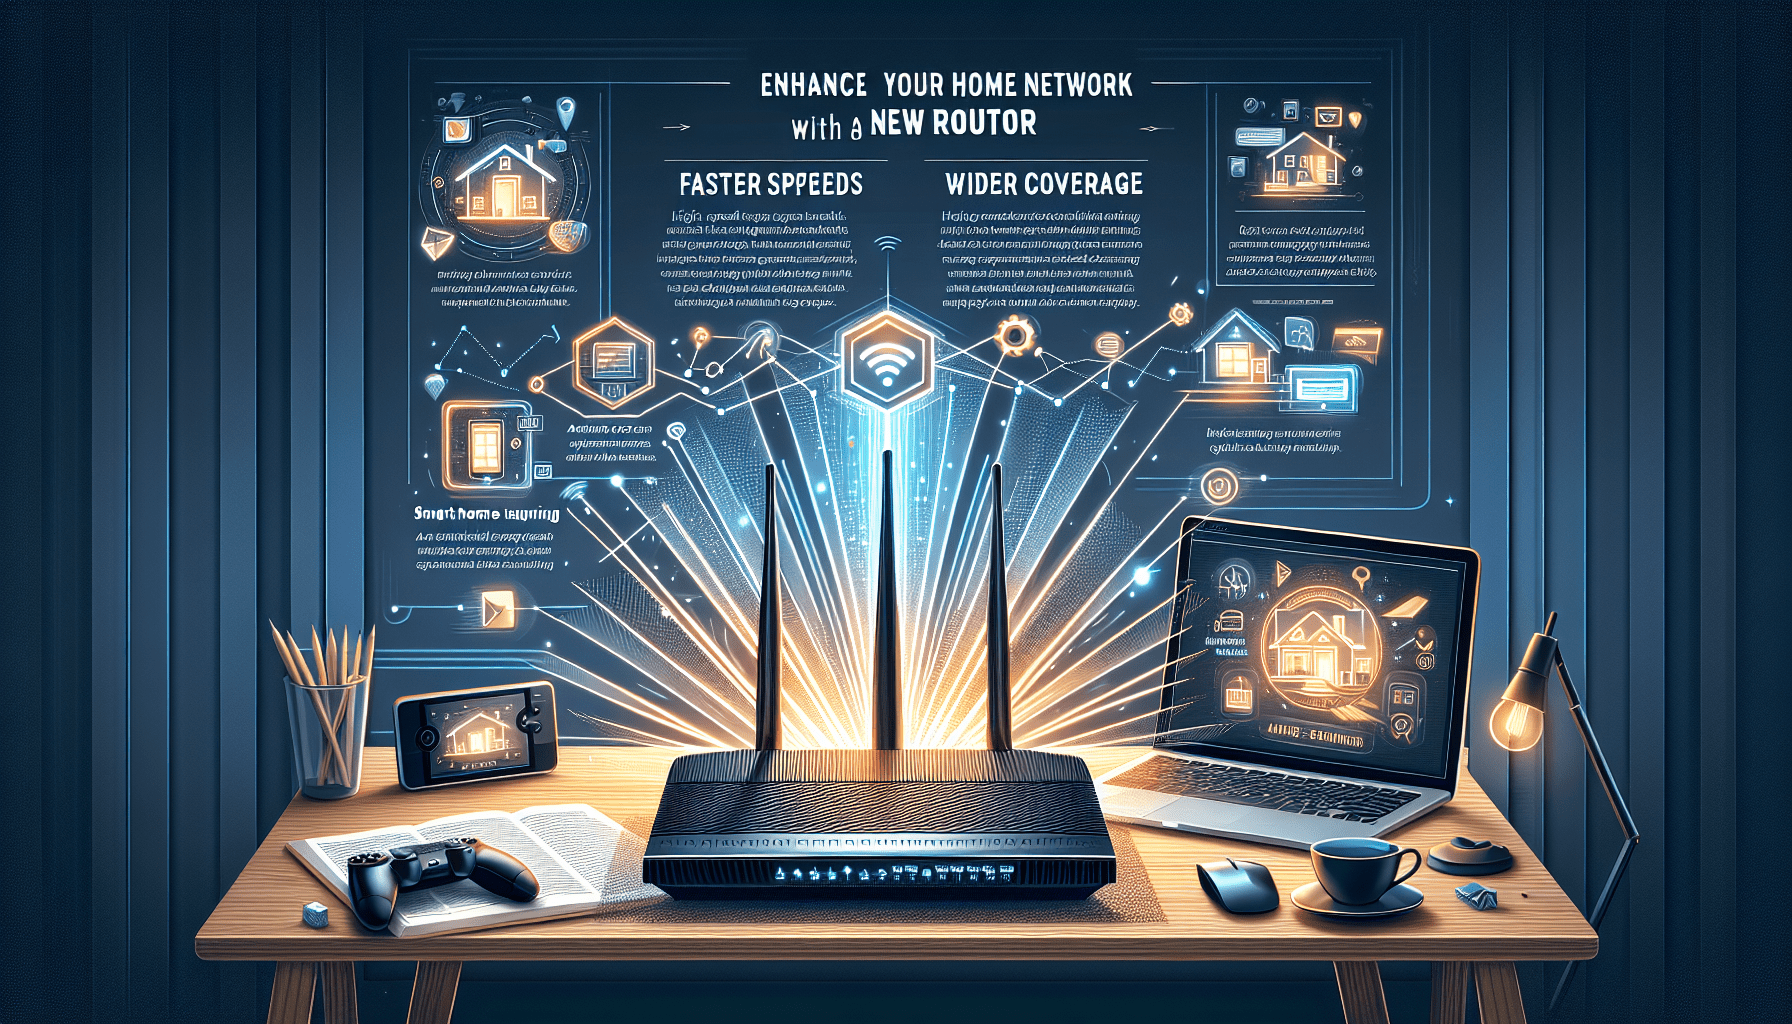 Enhance Your Home Network With a New Router